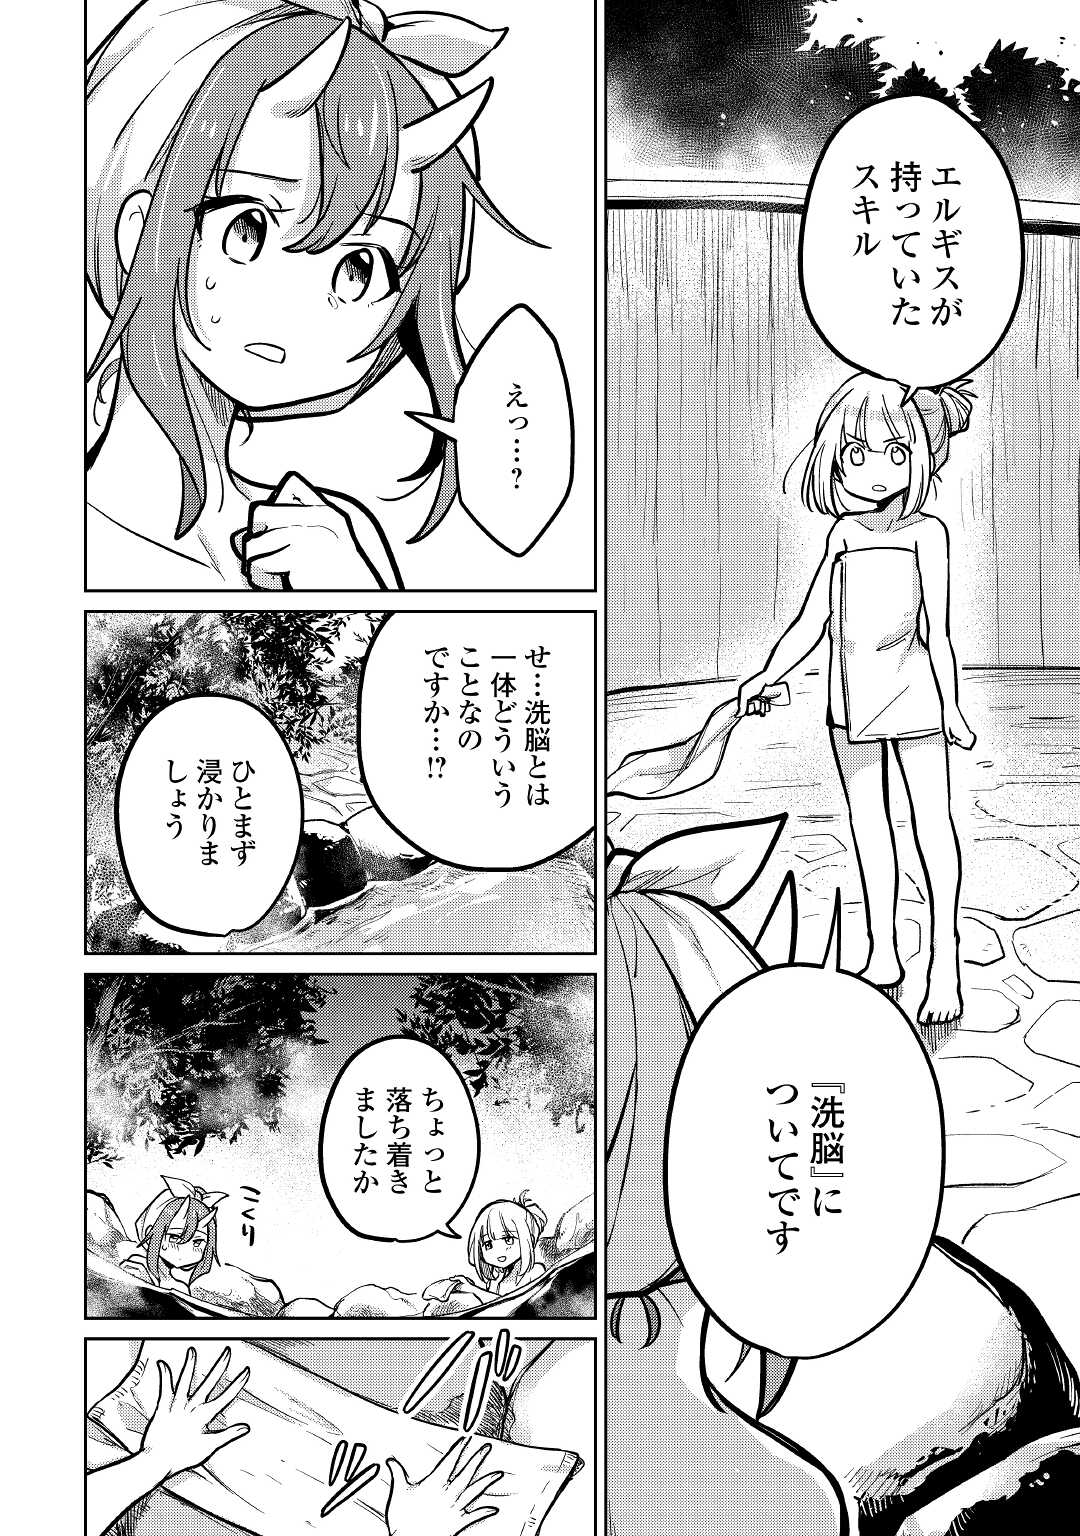 The Former Structural Researcher’s Story of Otherworldly Adventure 第41話 - Page 10